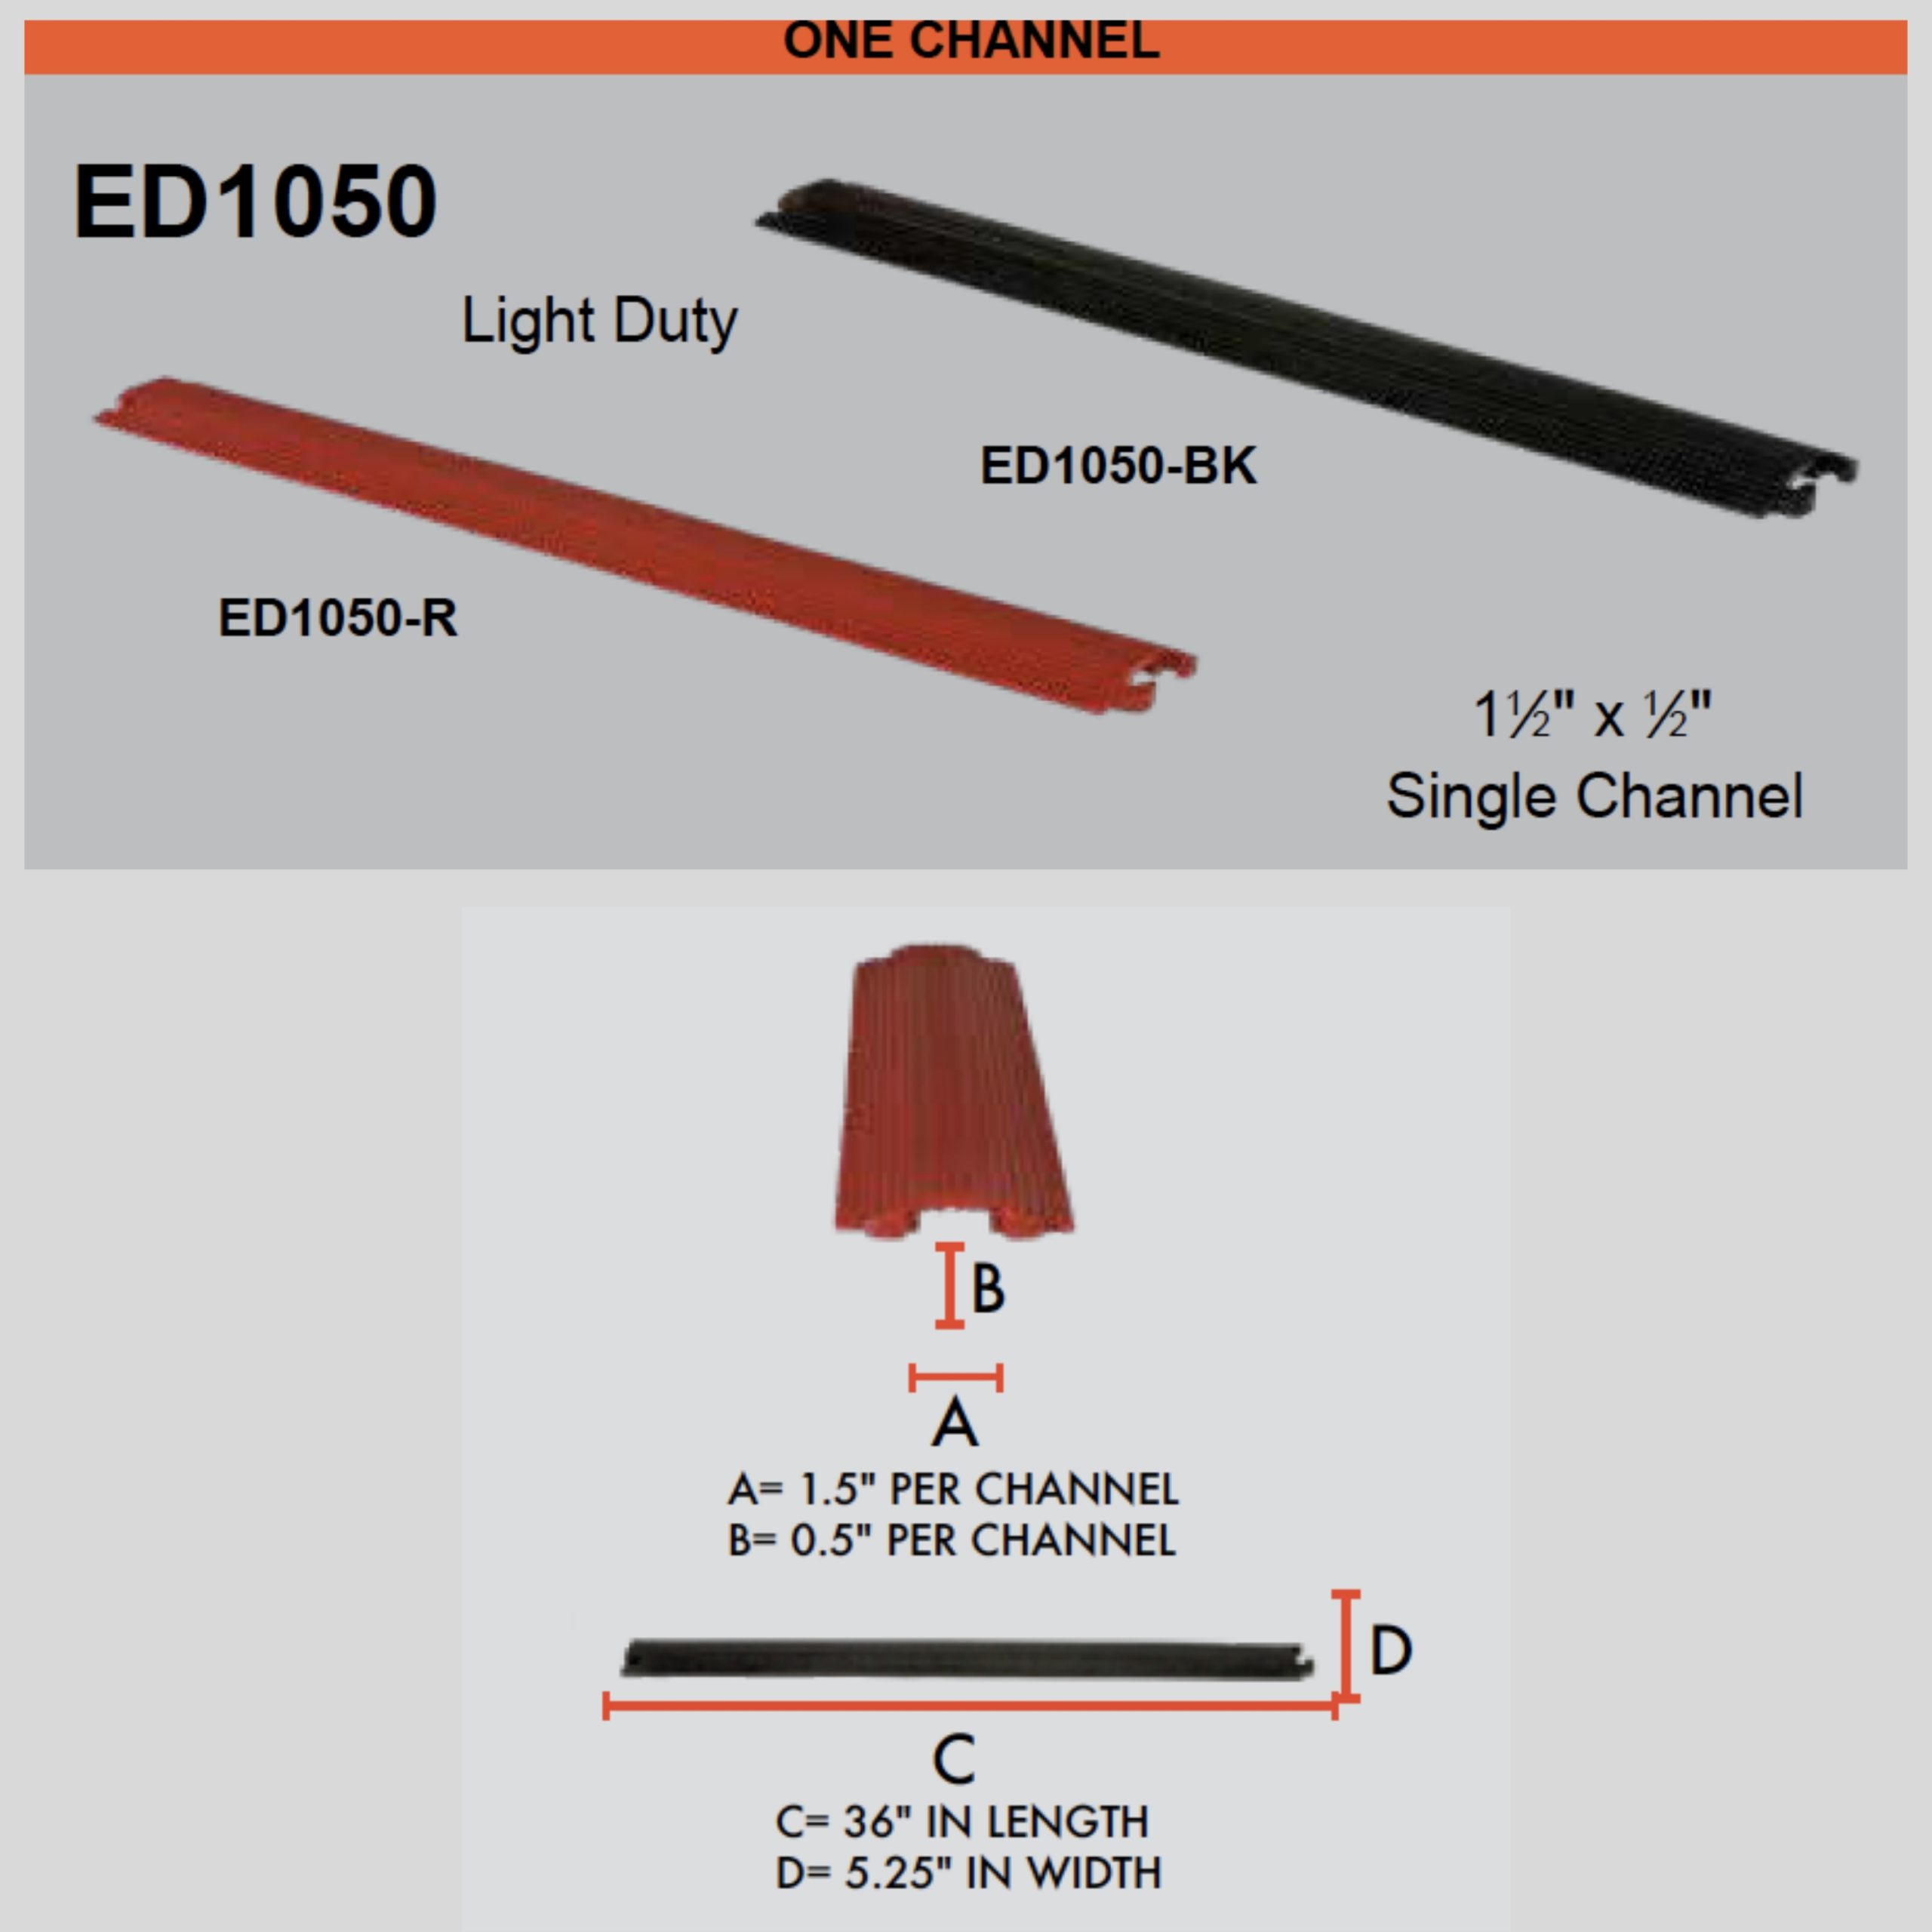 Elasco ED1050-BK Dropover, Single 1.5 inch Channel, Black, 12 pack. In  Stock. Ships Today. - Cable Protector Works - Elasco Wheel Chocks, Cable  Protectors and Cable Ramps %